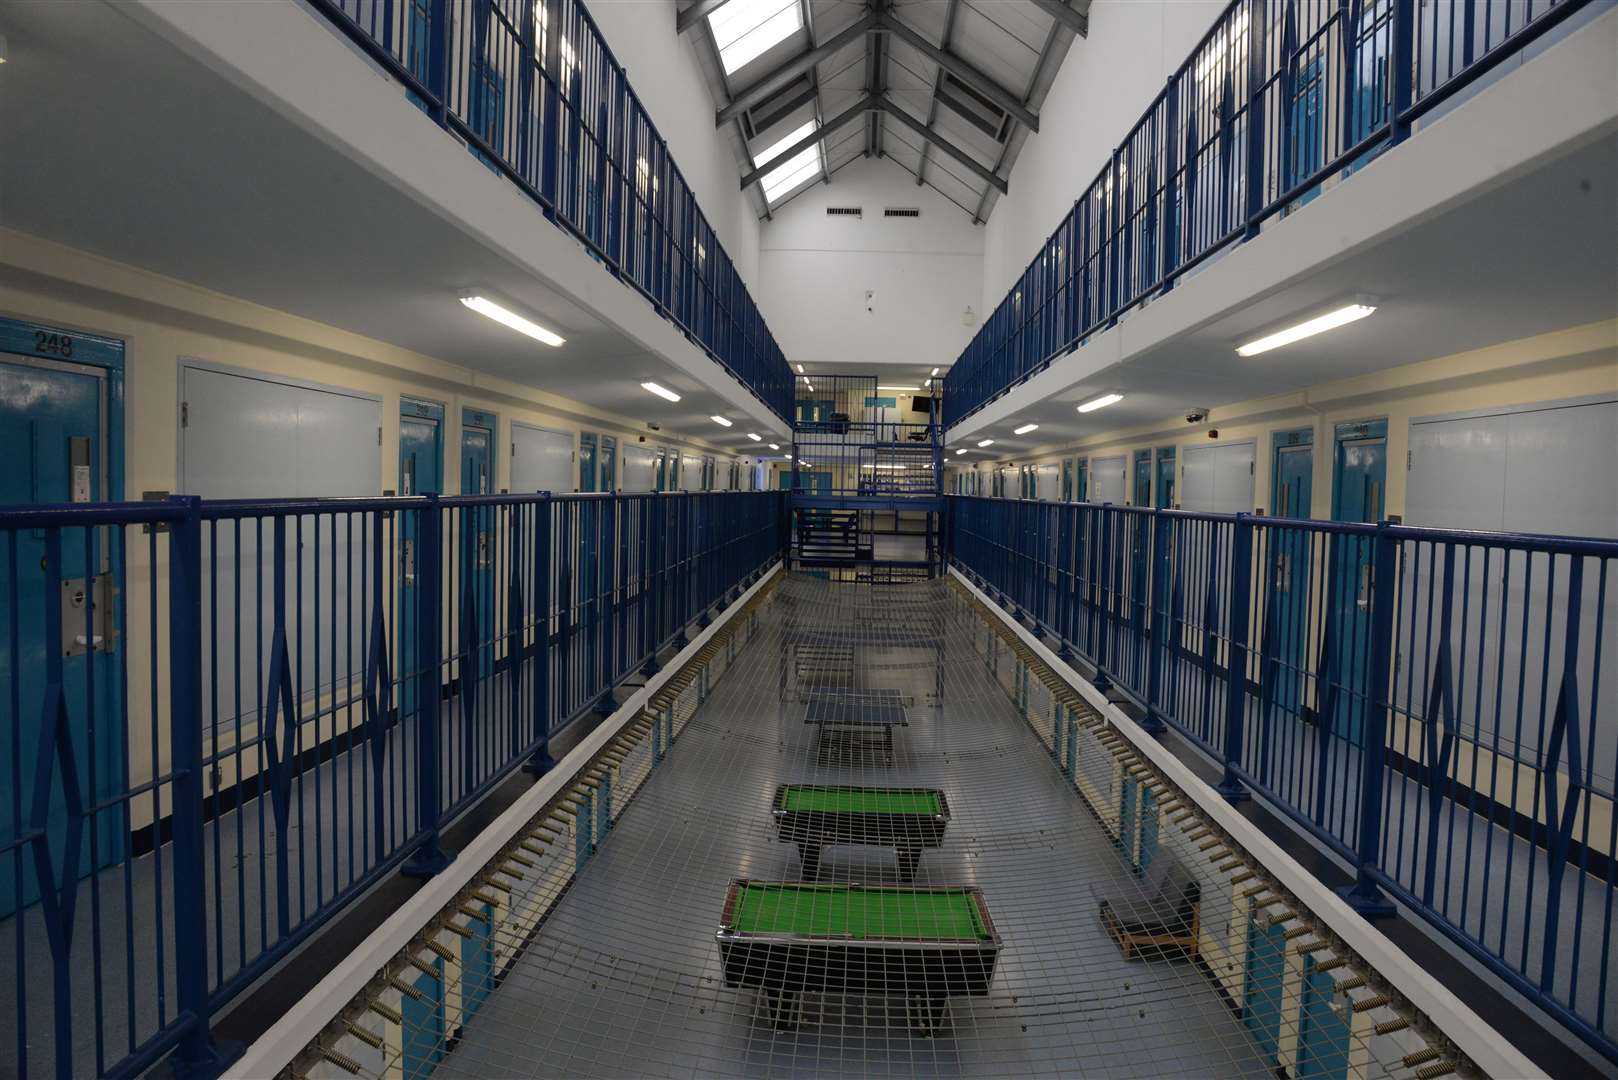 HMP Swaleside on the Isle of Sheppey has at least 32 cases of Covid-19